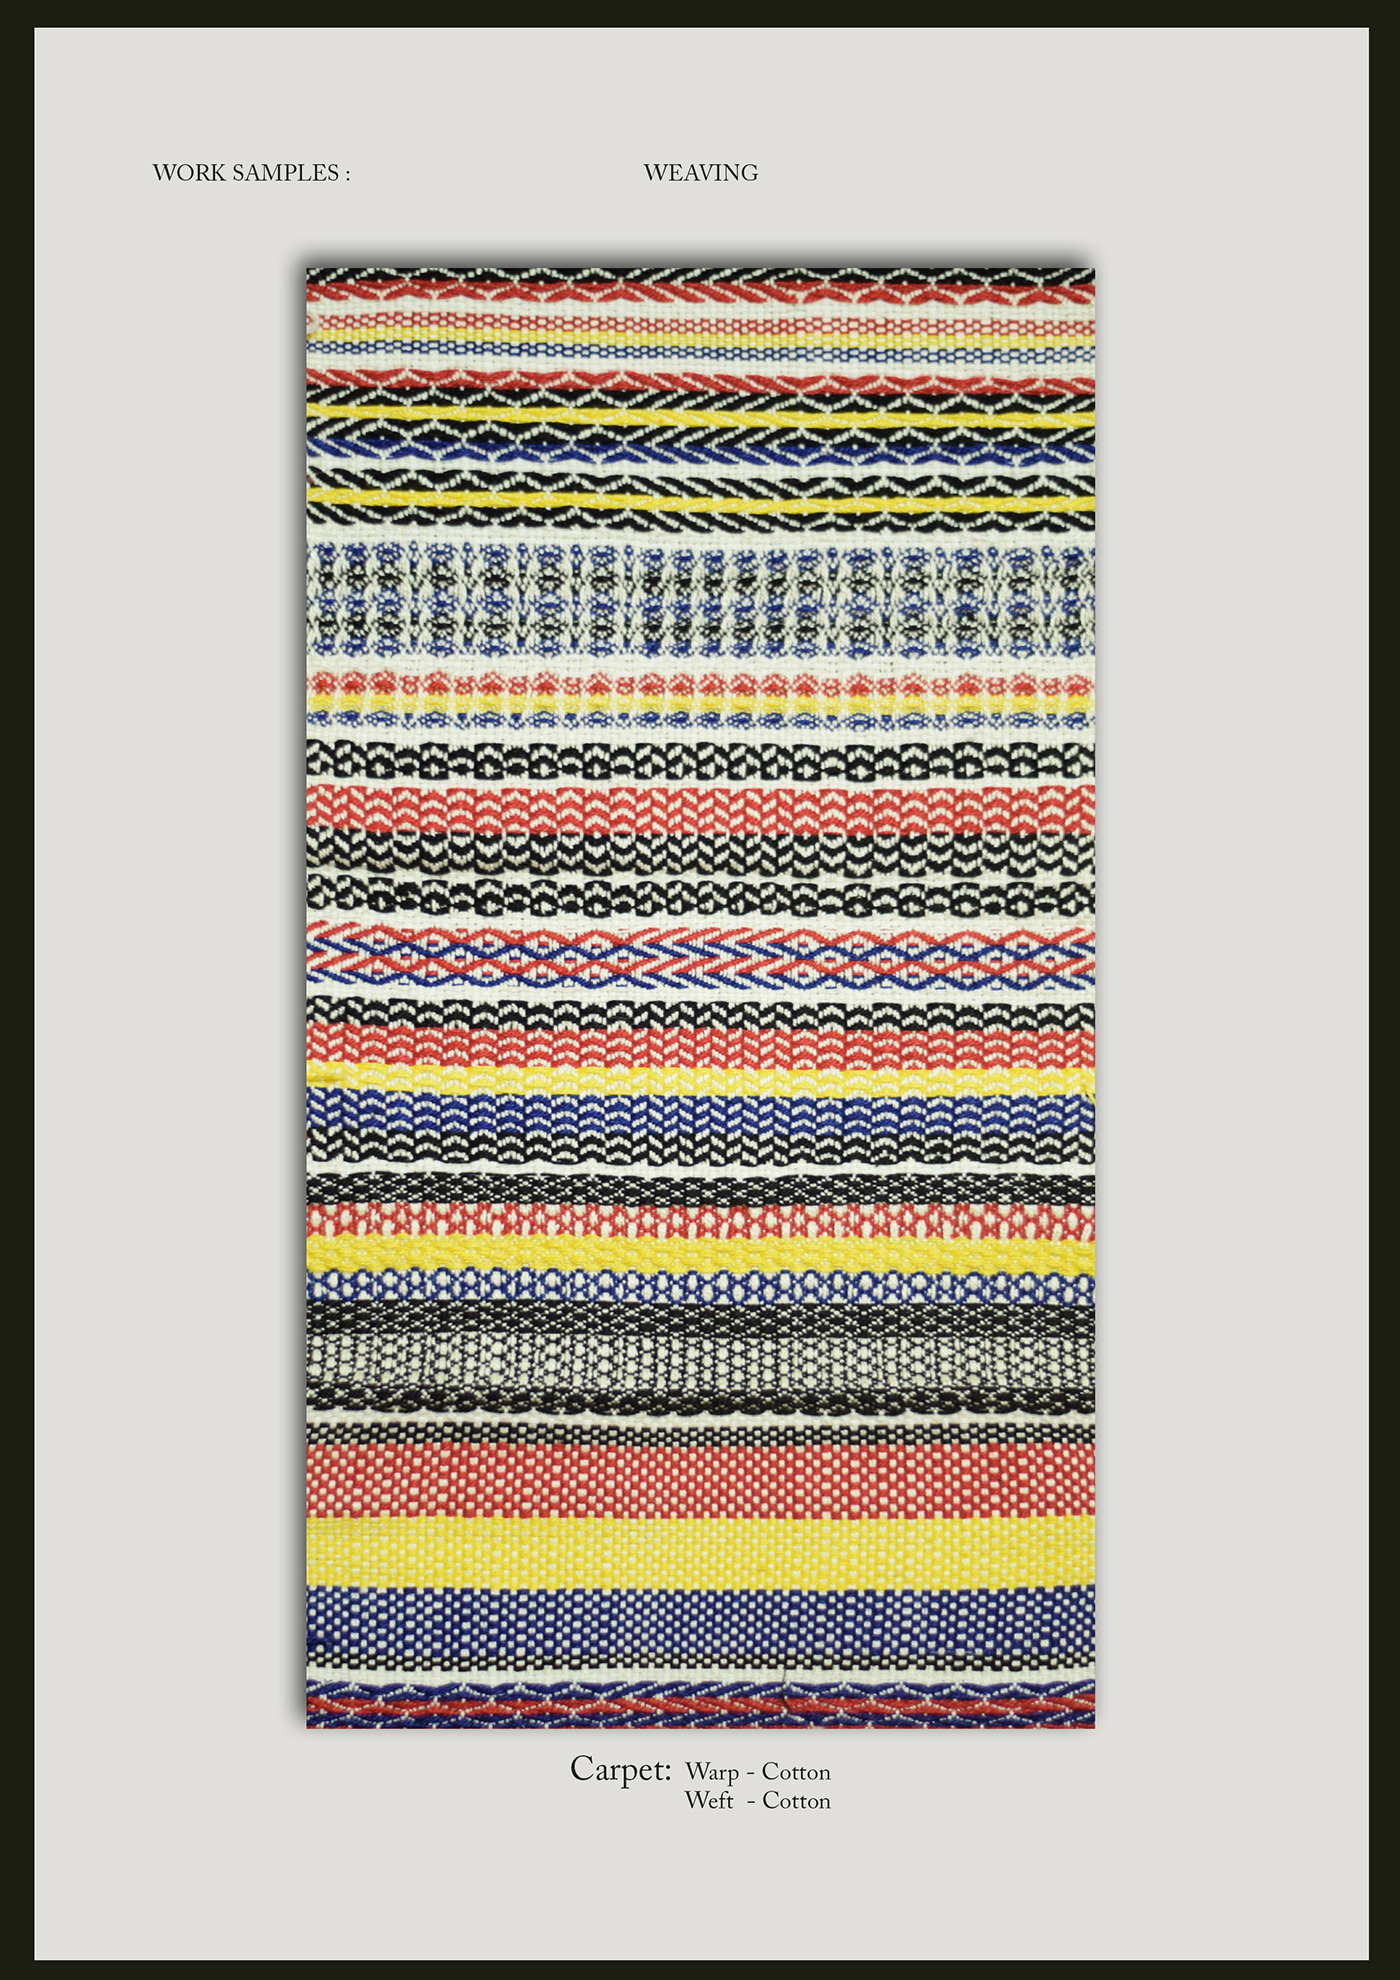 weaver Woven twill honeycomb weave HANDLOOM WORK hand woven colors Primary colors design textile